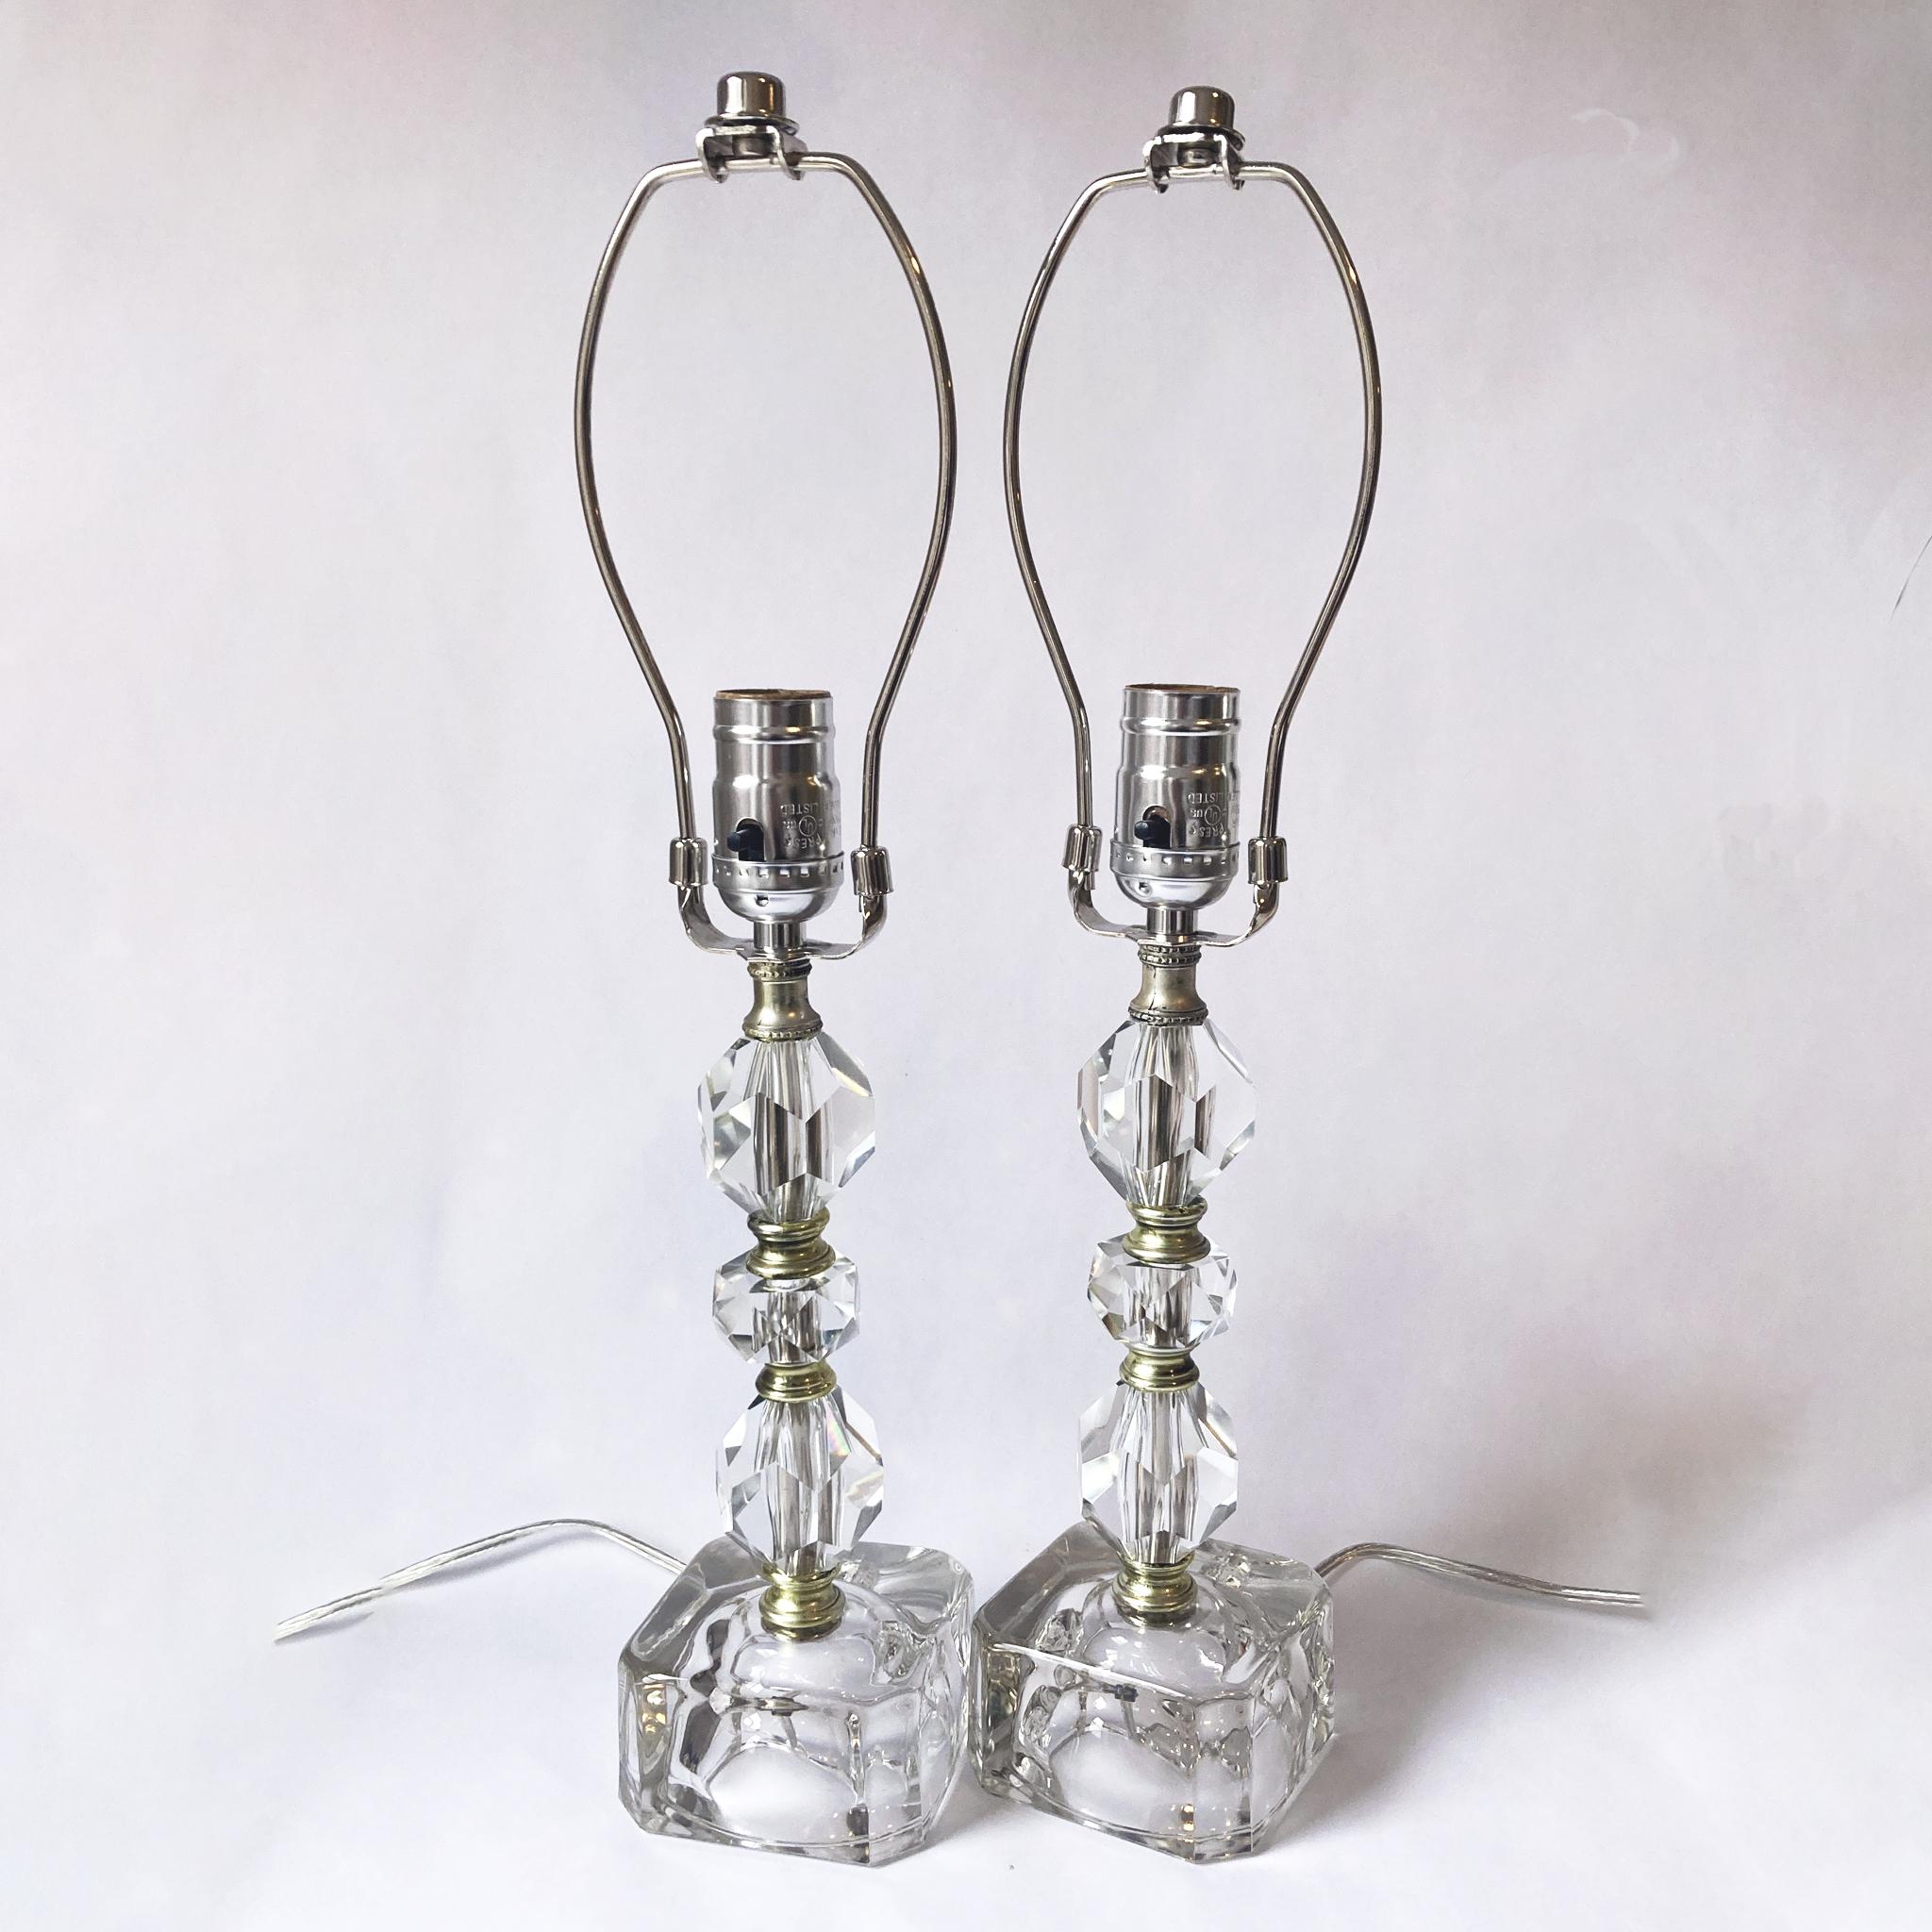 Stunning pair of faceted crystal lamps with glass bases, 1950s. Great size as table or bedside lamps. When the lamps are on, the faceted crystal pieces catch the light beautifully. 

The voltage is 110, standard US plug. Both lamps have been newly